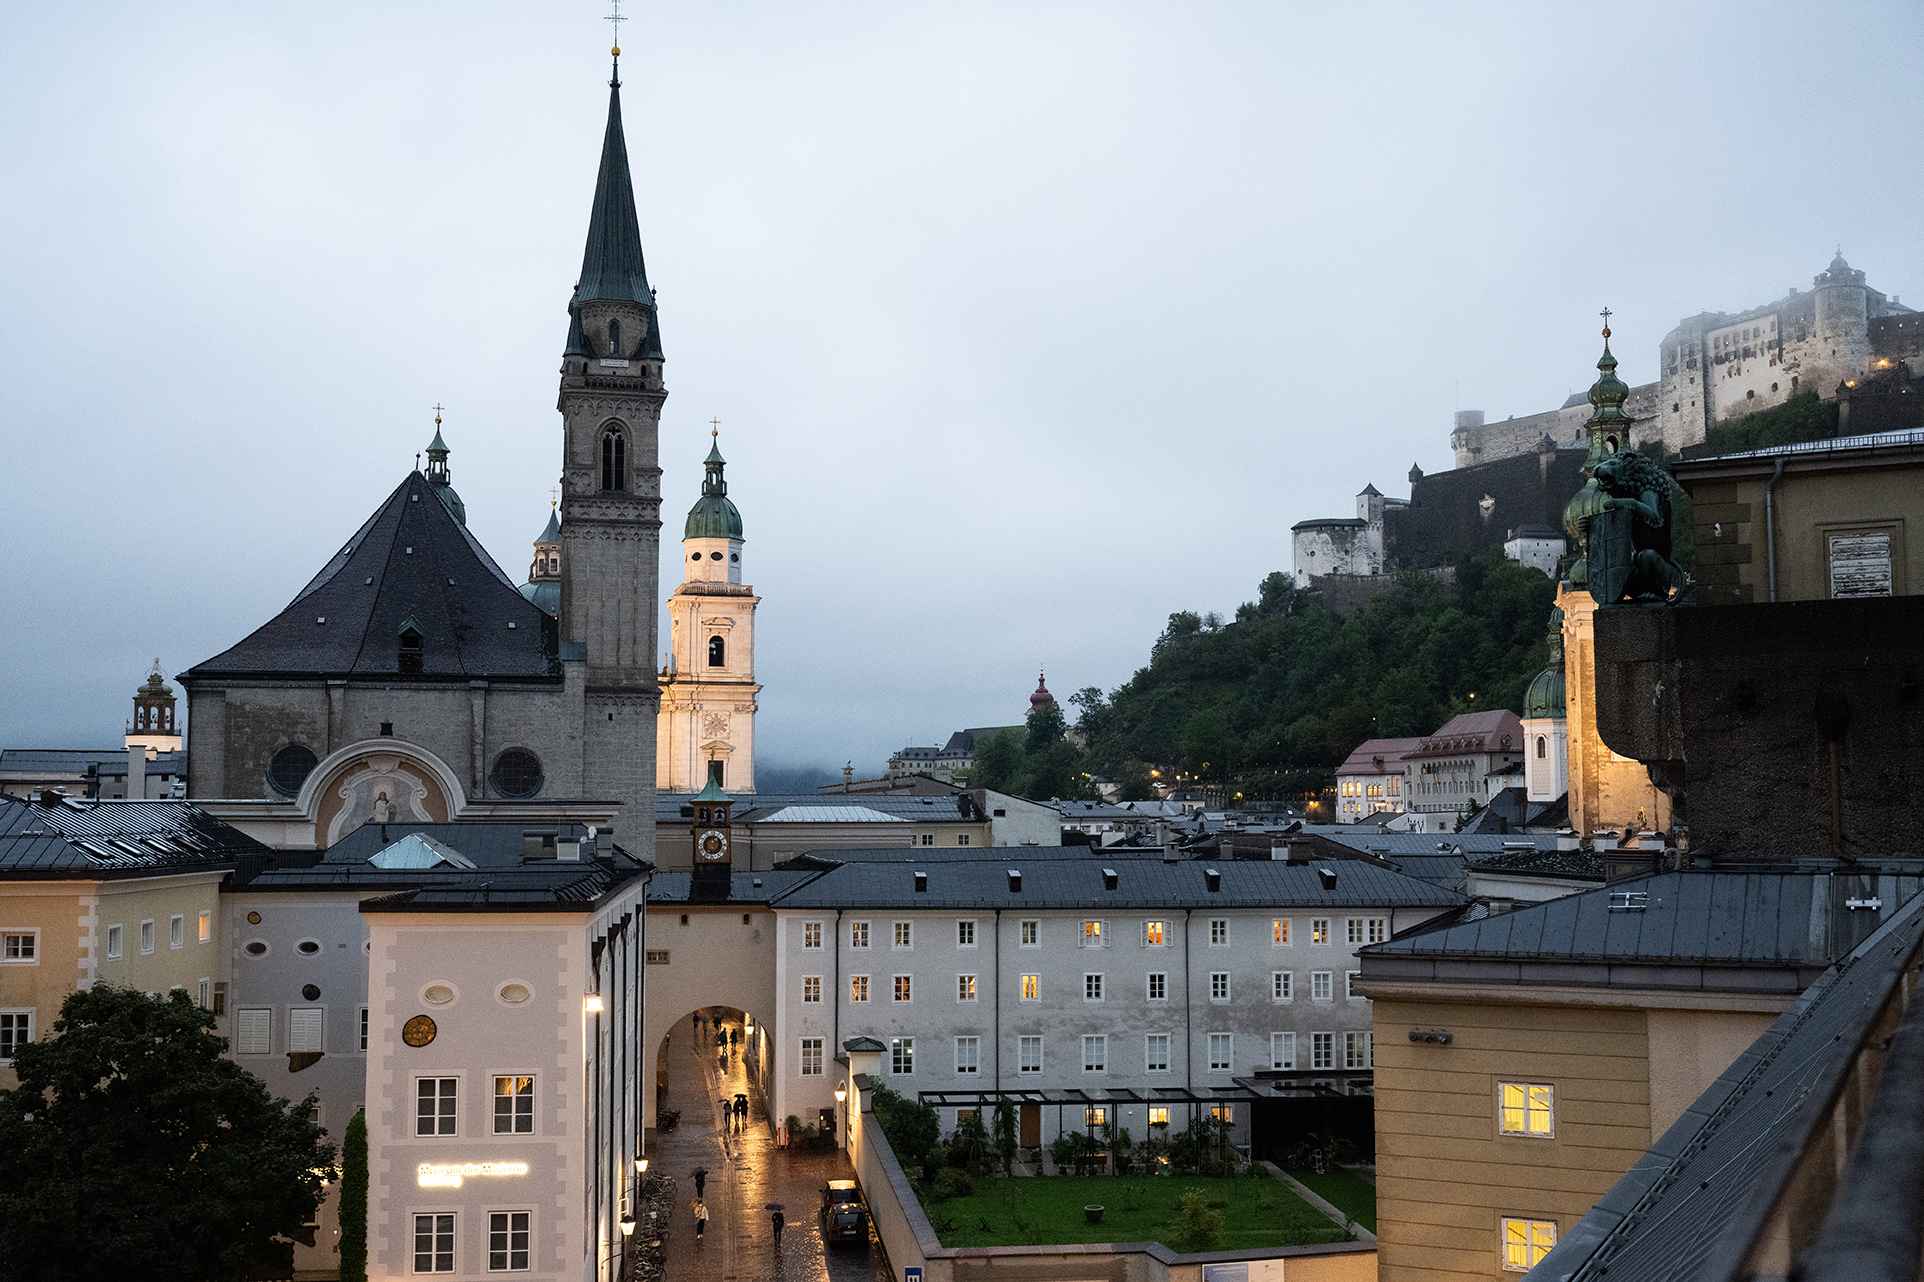 City view of Salzburg with the castle in the back almost dark and rainy